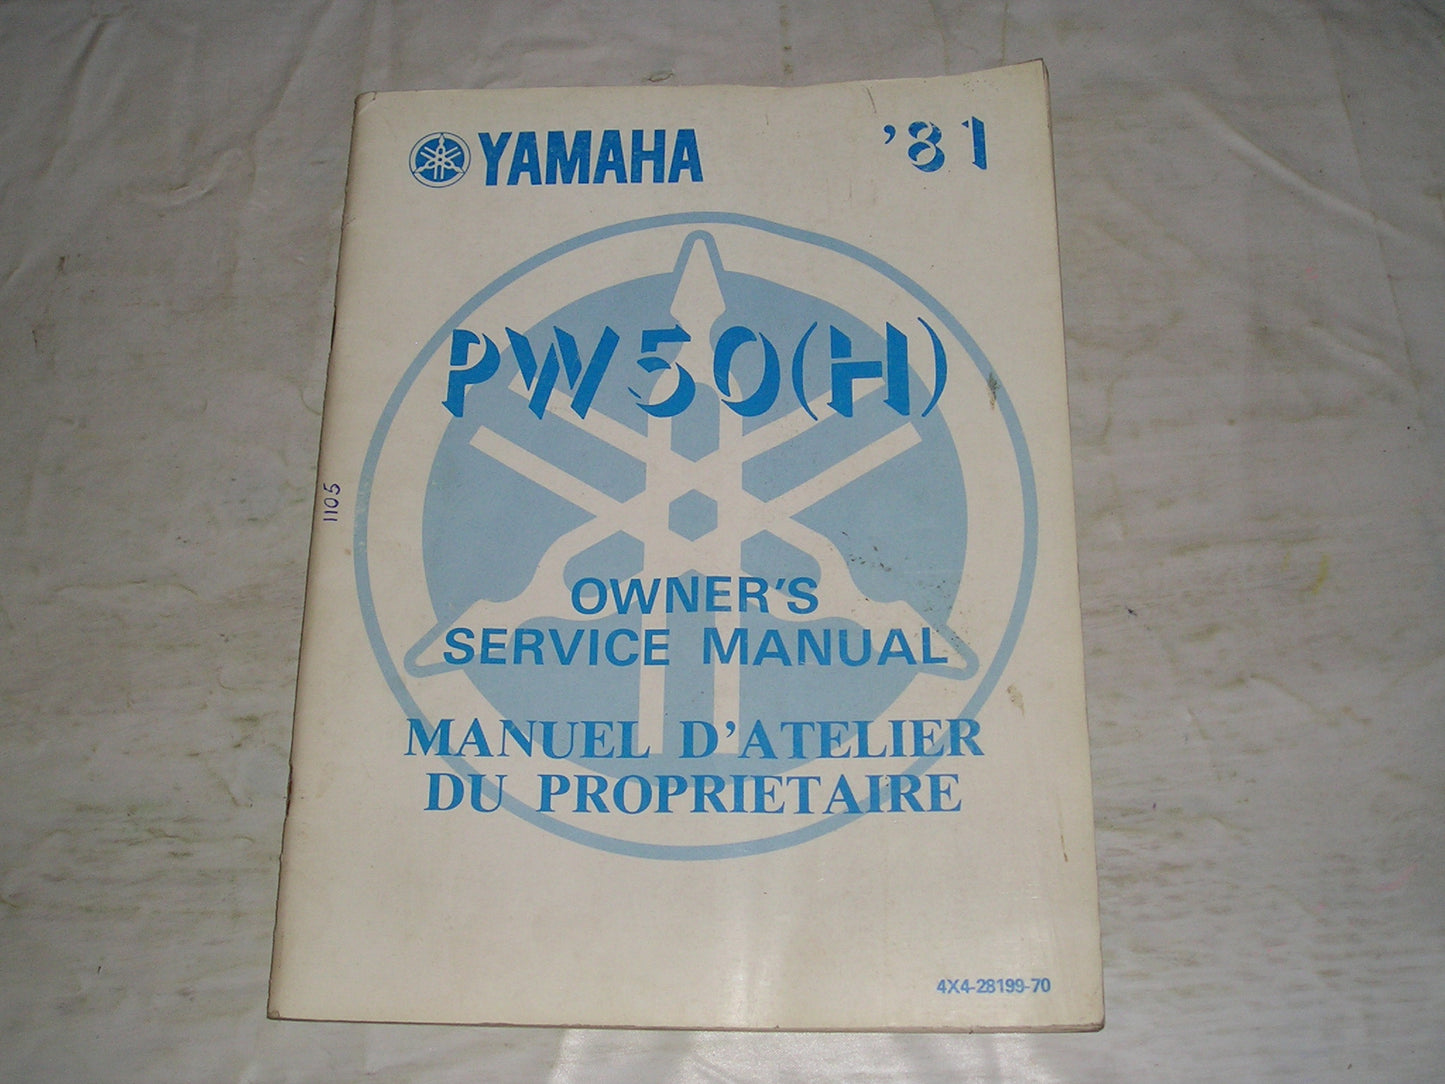 YAMAHA PW50 H Factory Owner's Service Manual  4X4-28199-70  #1105